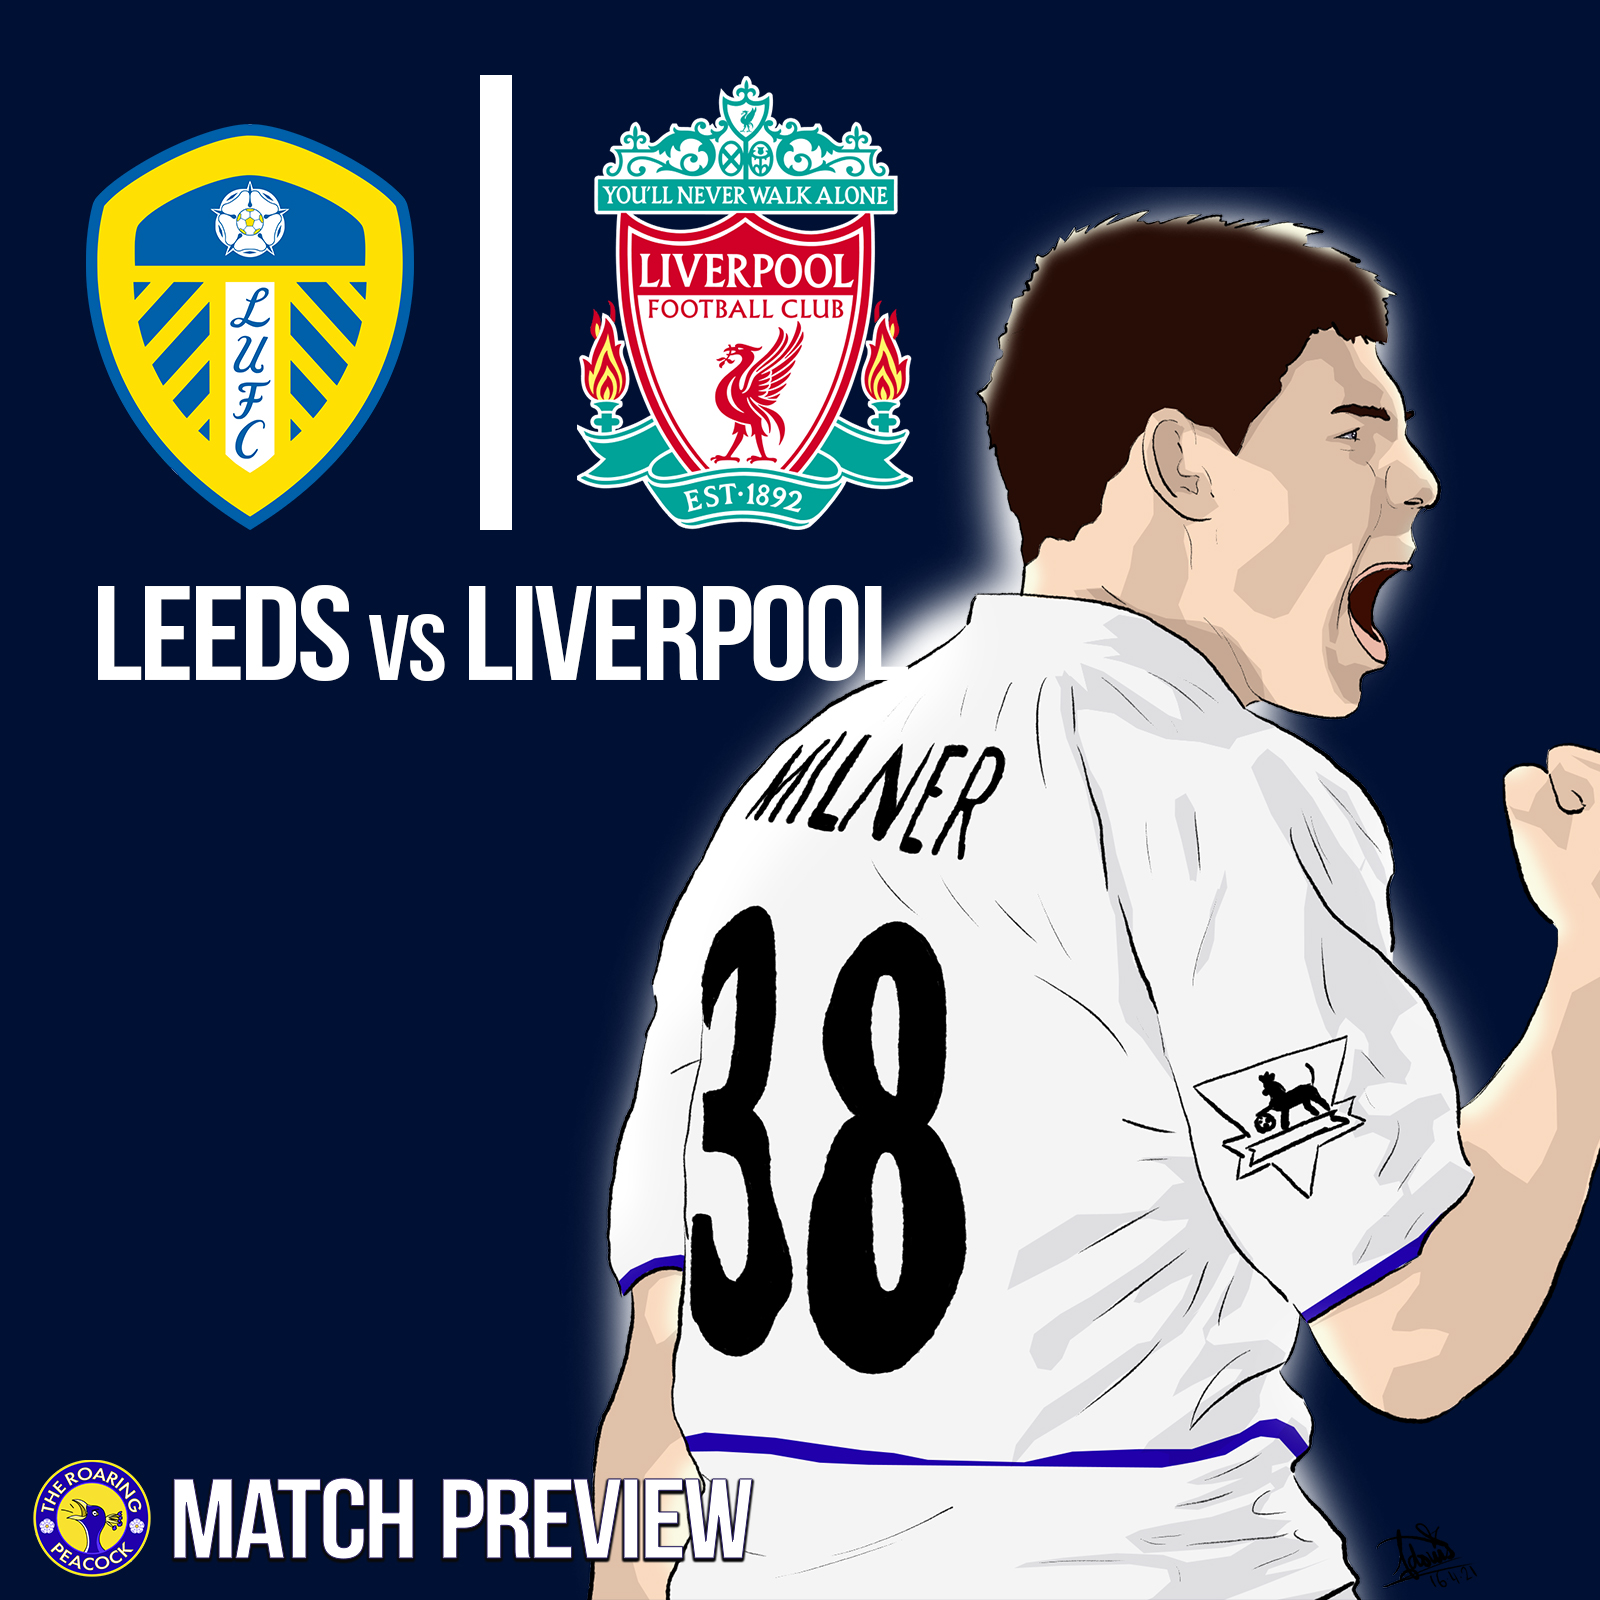 Leeds vs Liverpool Match Preview feat The Anfield Wrap